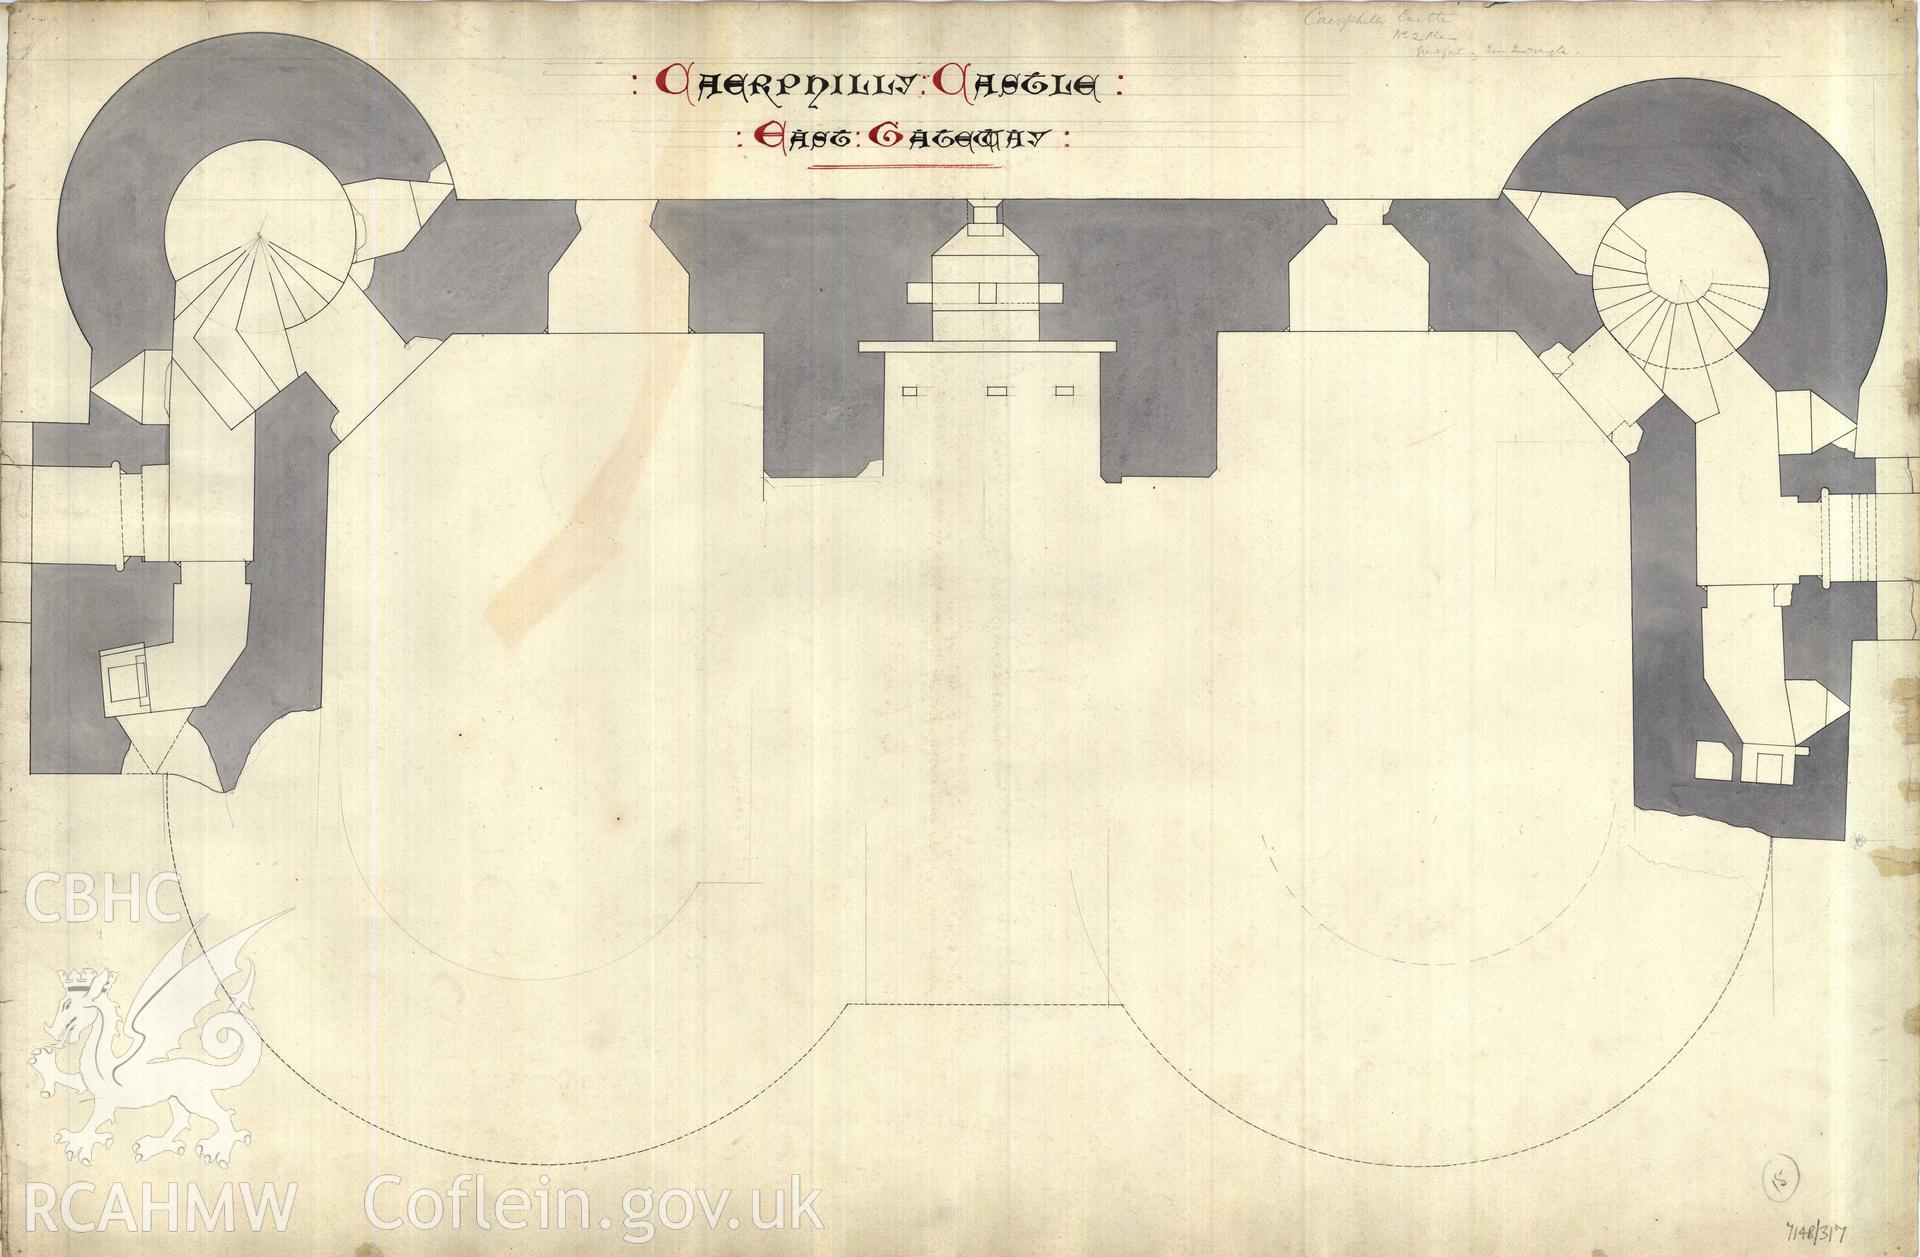 Cadw guardianship monument drawing of Caerphilly Castle. Inner ward Inner E gate up floor plan. Cadw Ref. No:714B/317. Scale 1:24.